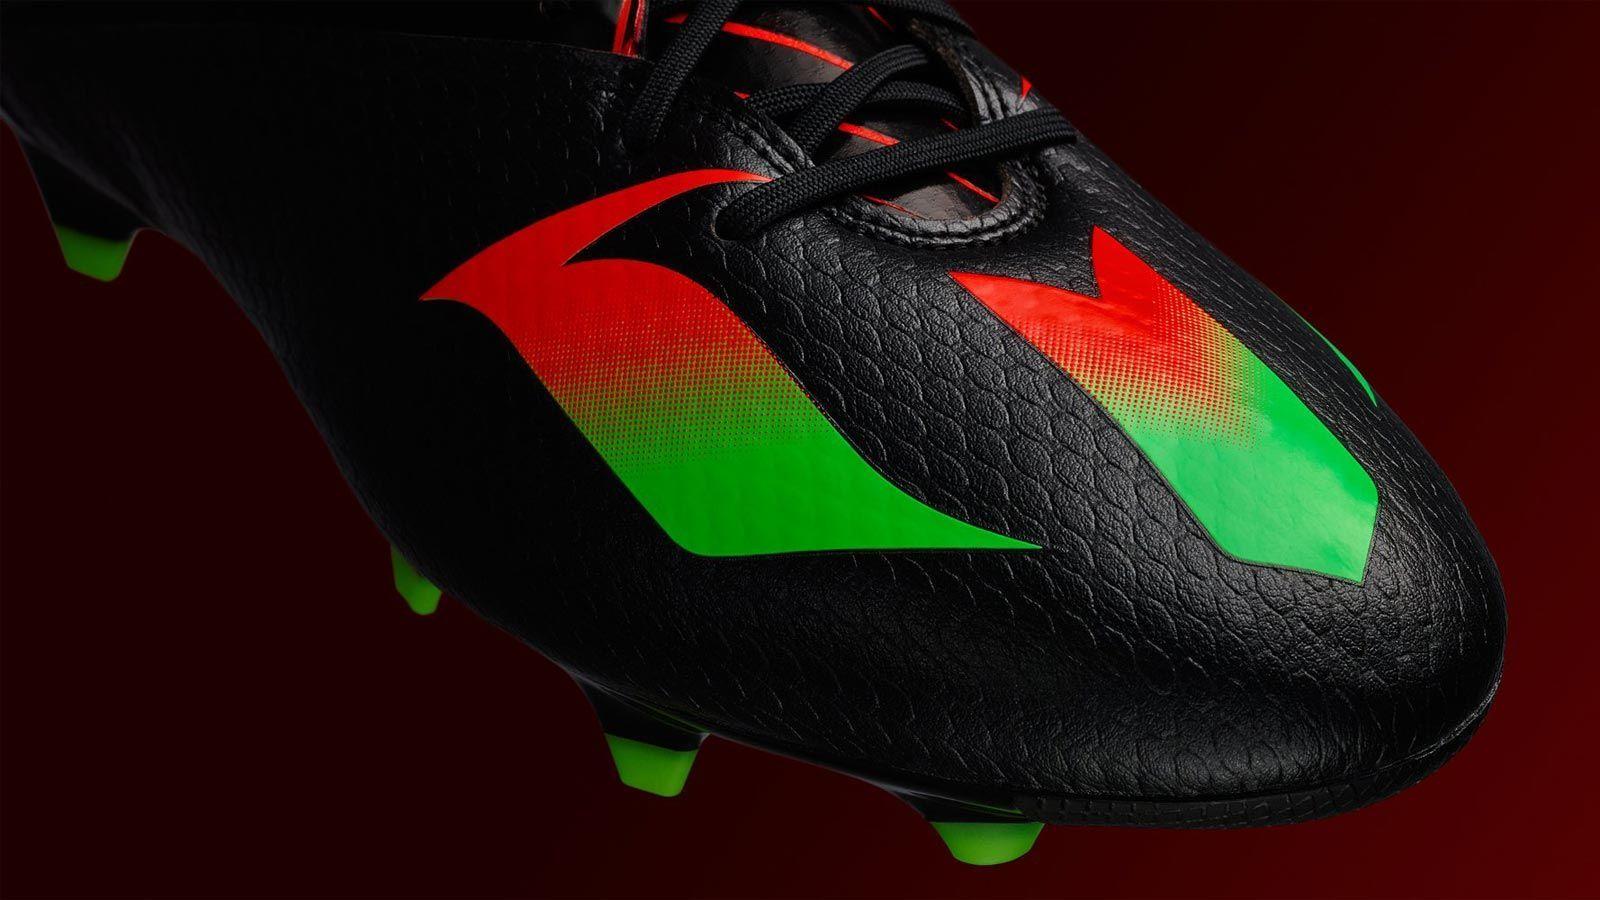 The New Black / Red Adidas Messi 2015 2016 Football Boot Features An